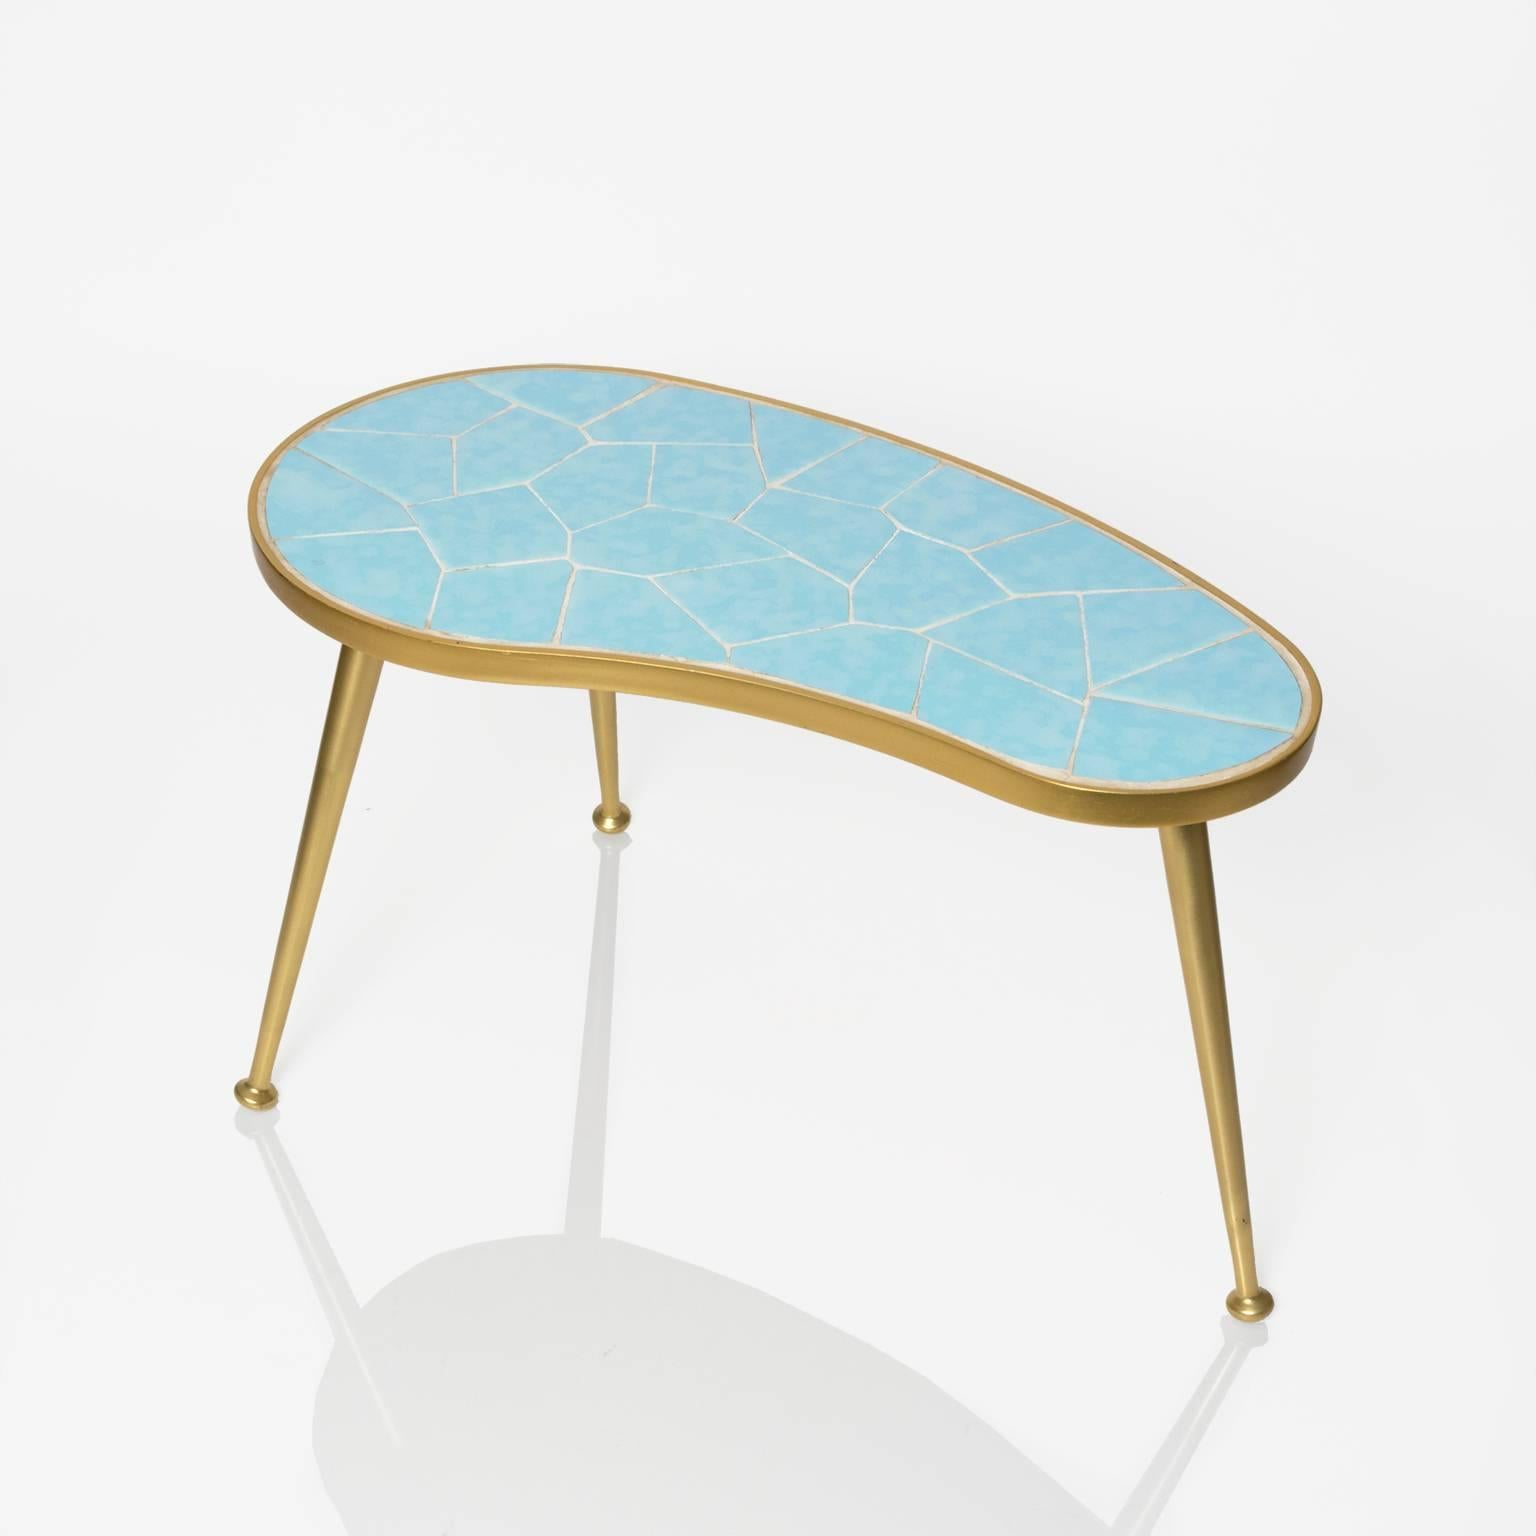 A small organic kidney shaped occasional table with a blue tiled surface. The frame and three legs are cast anodized aluminum in gold. Made in Europe, circa 1970s.
 
Measures: Width 11”, length 19.5”, height 11".